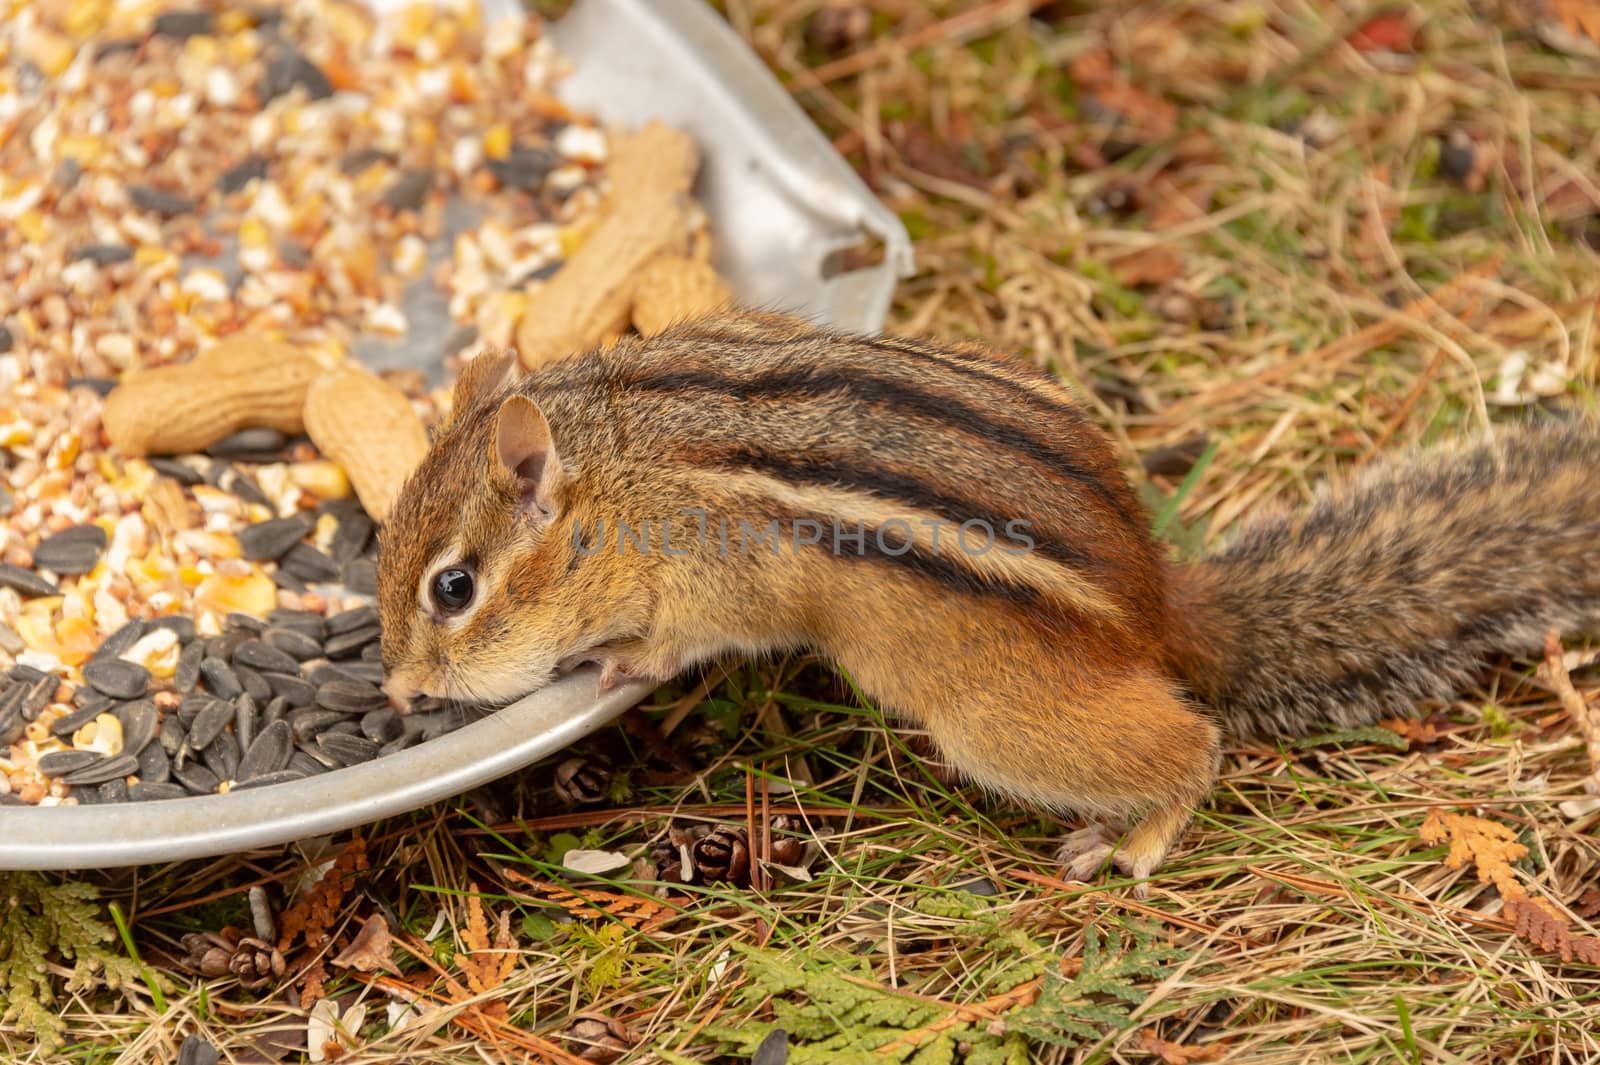 Chipmunk eating nuts and seeds in Quebec, Canada